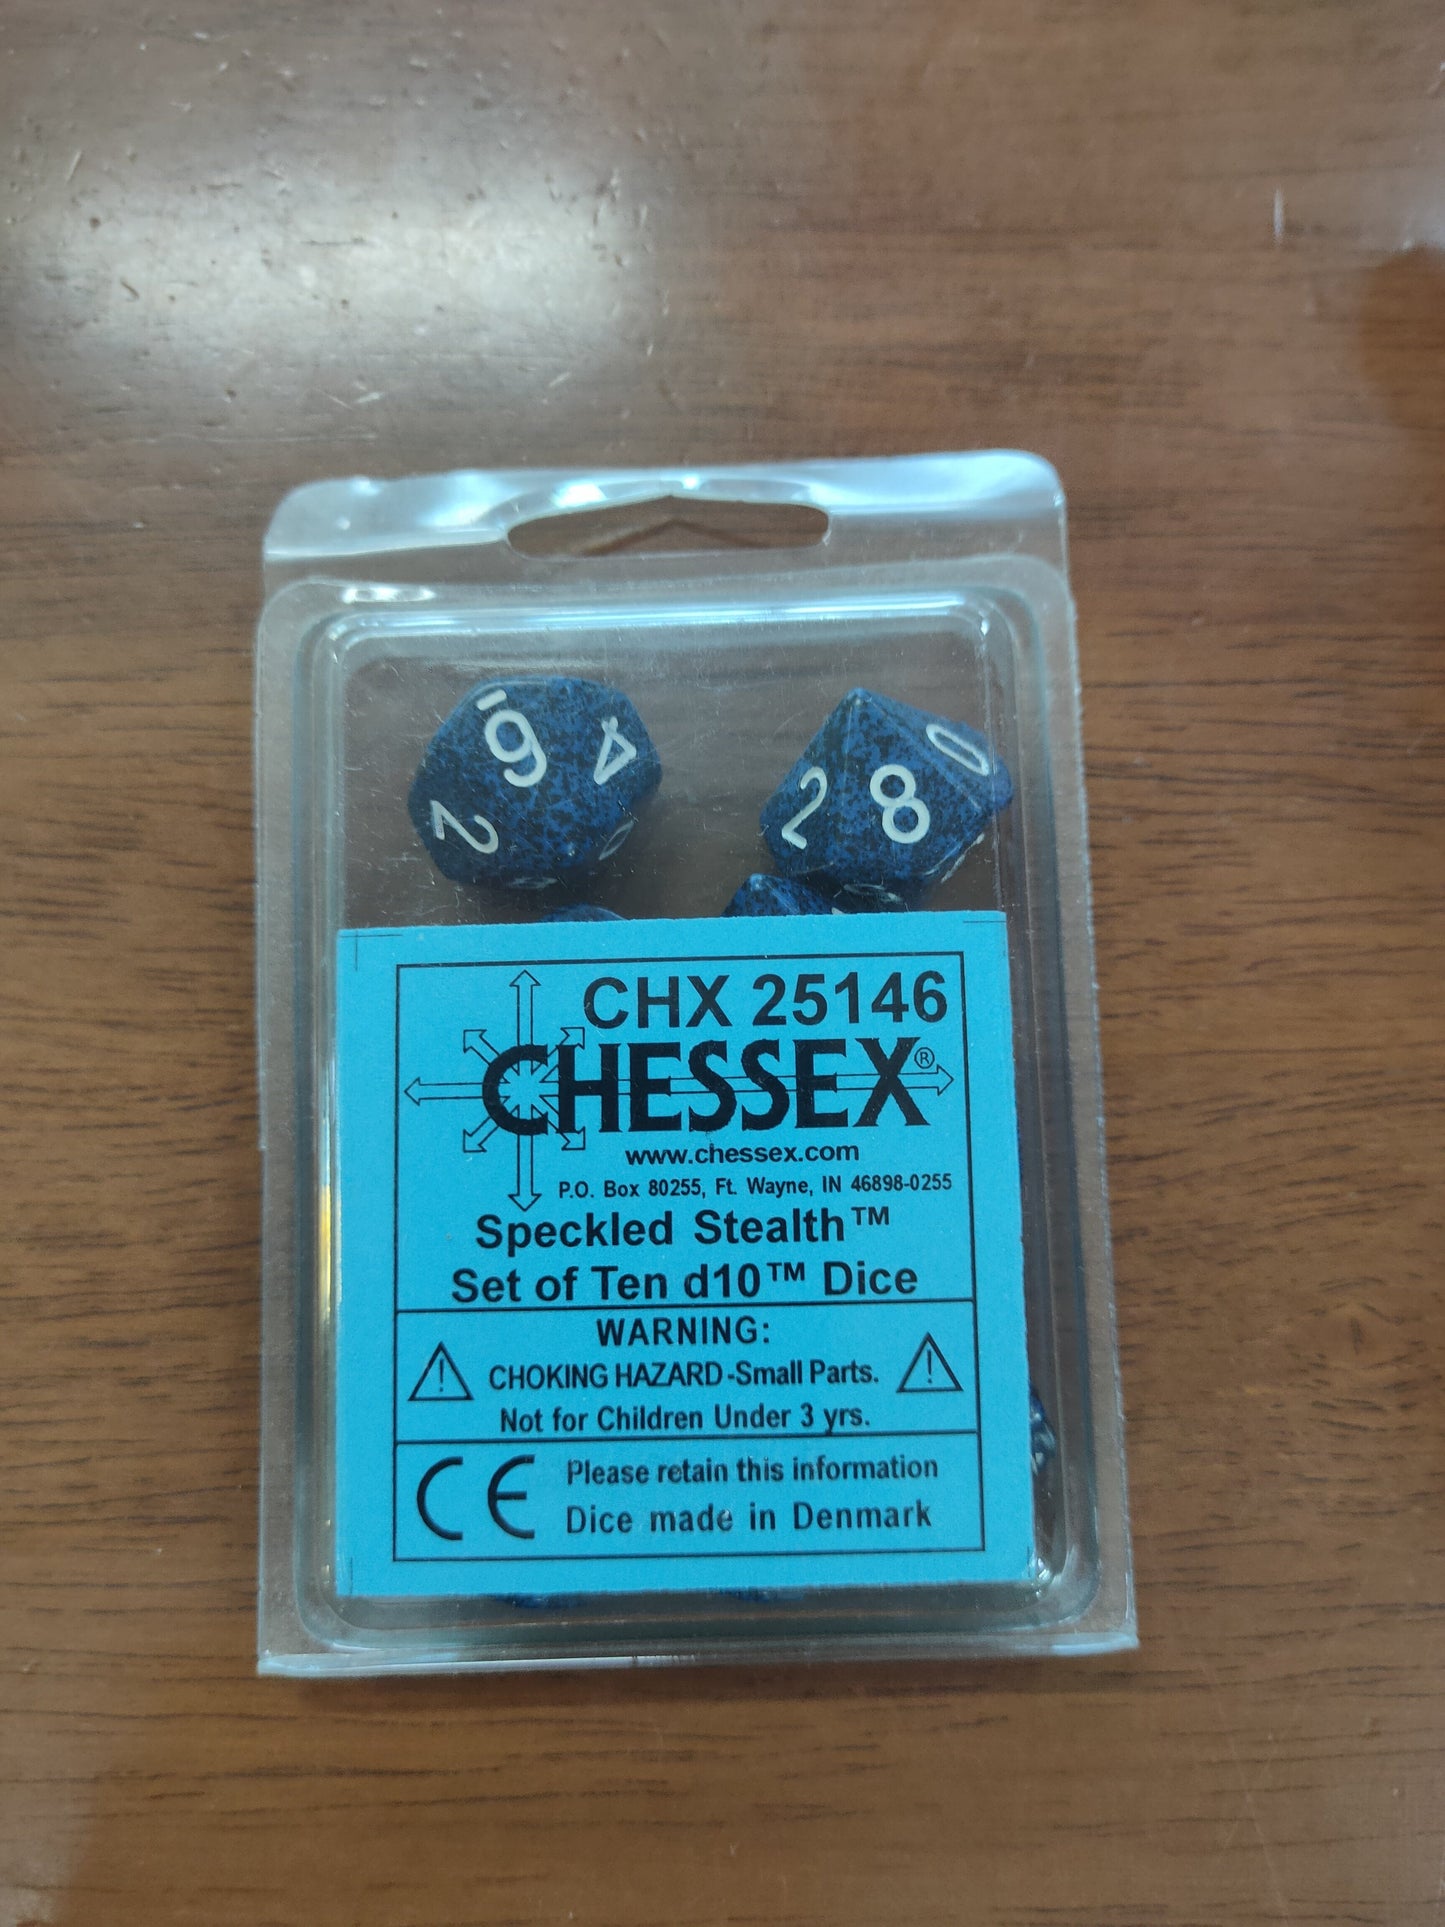 Speckled Stealth Set of Ten d10's General CHESSEX 